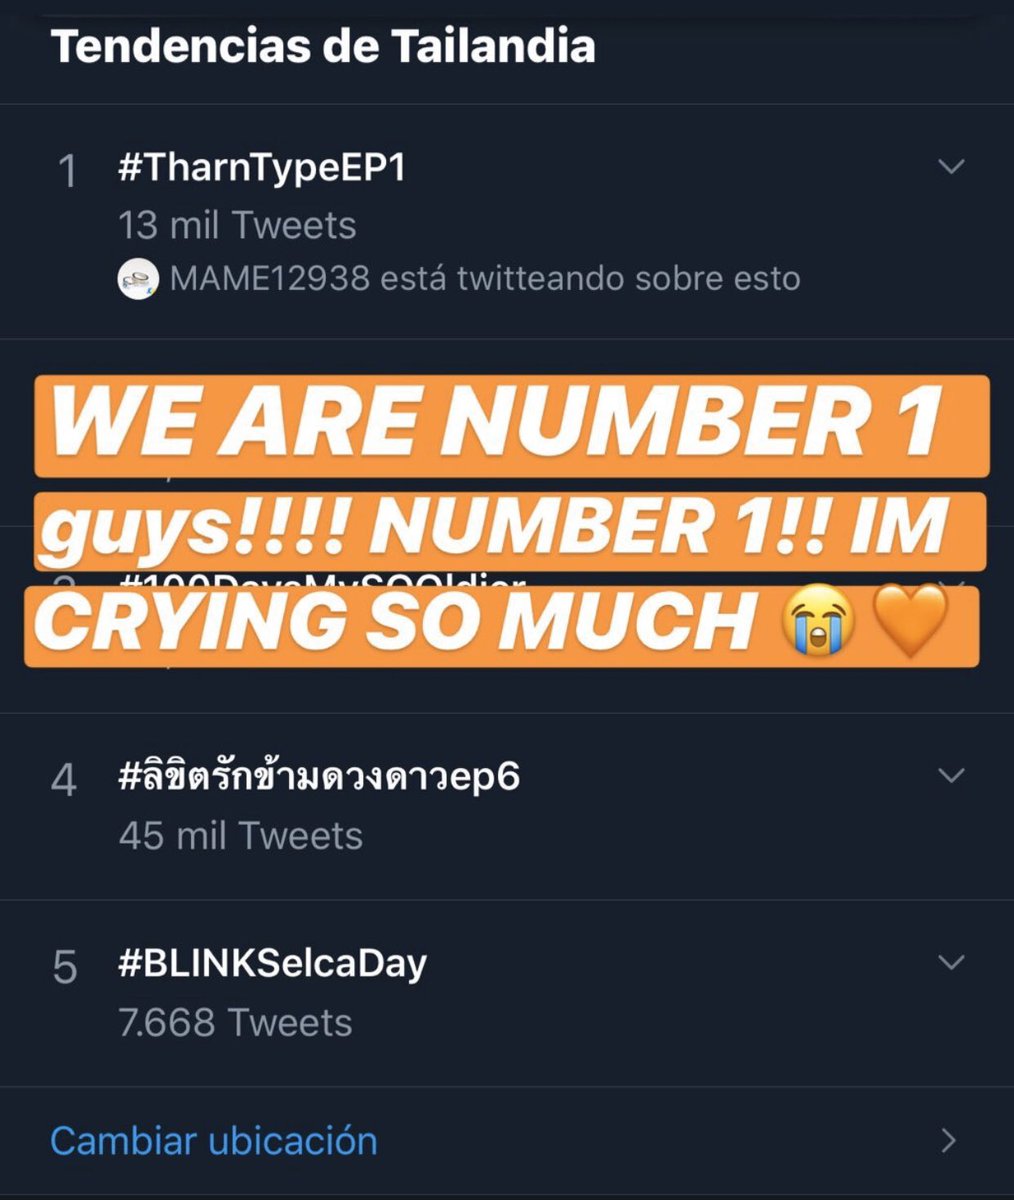  First time they went to a Kazz Sports: September 8th,2019 First time Watching the first episode of TTTS together: October 7th, 2019The same Day was the first episode and we made the trending #1 on thailand  #MewGulf